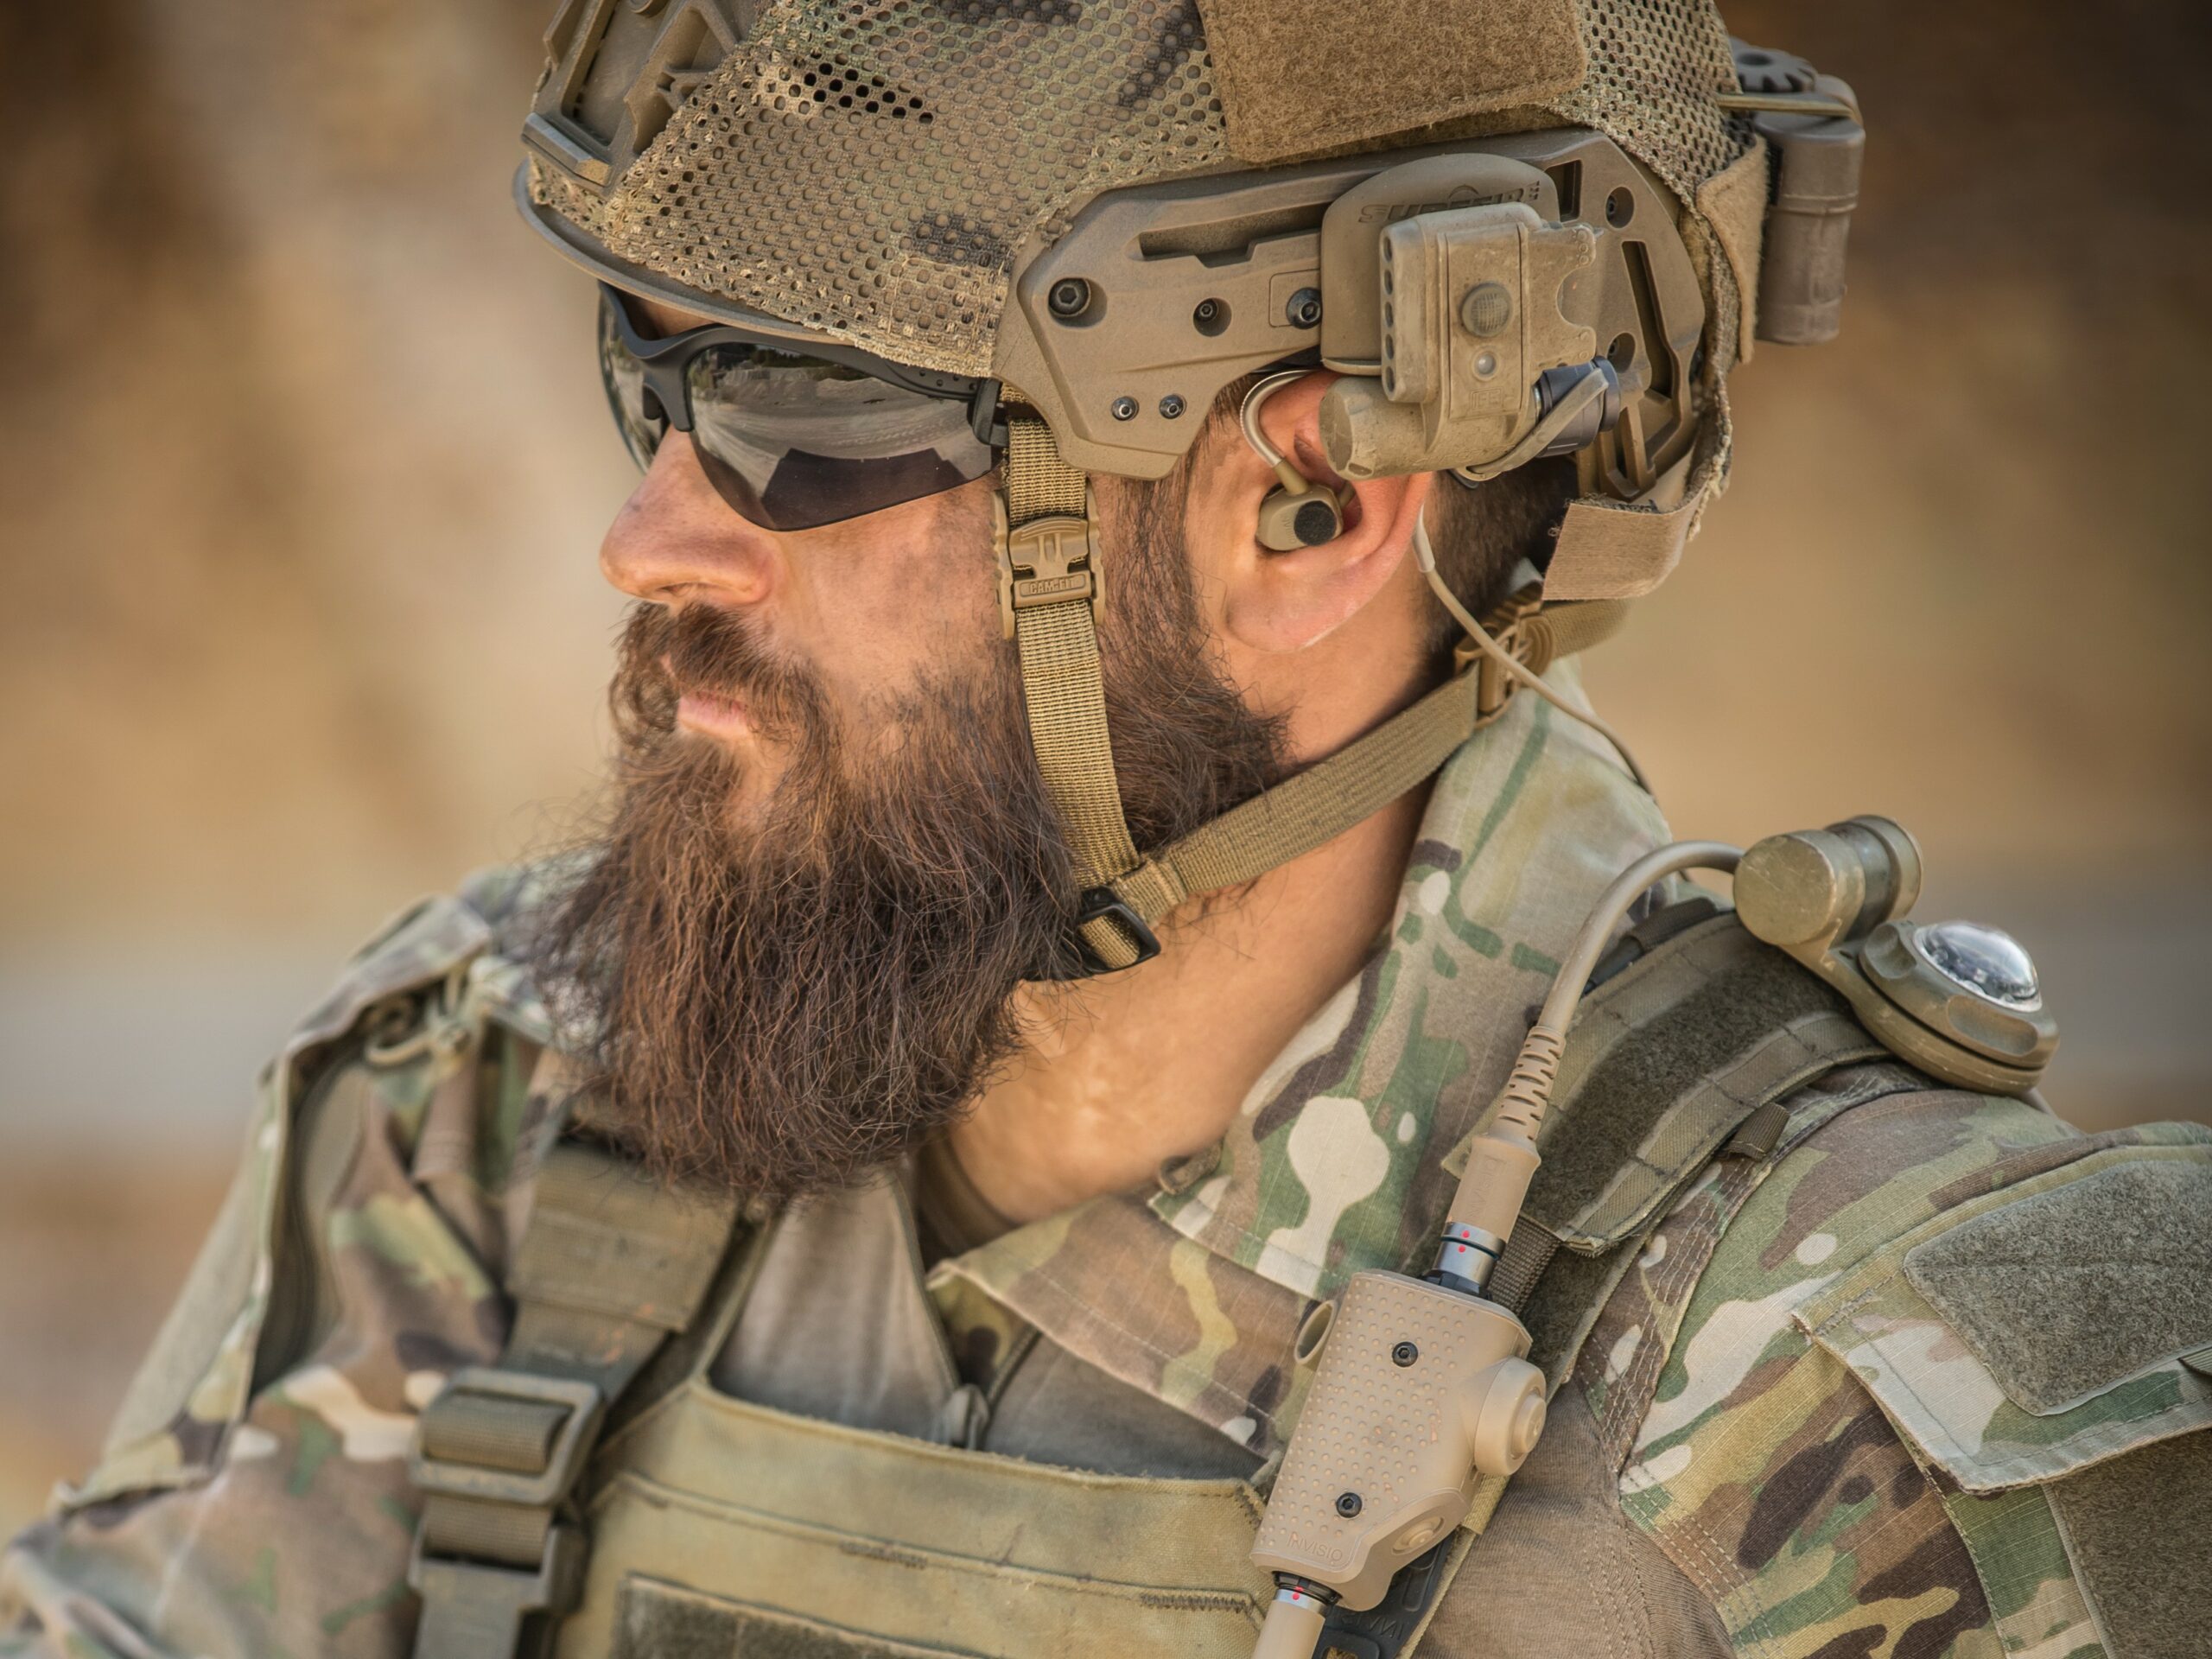 Hearing protection system equipped to a soldier.